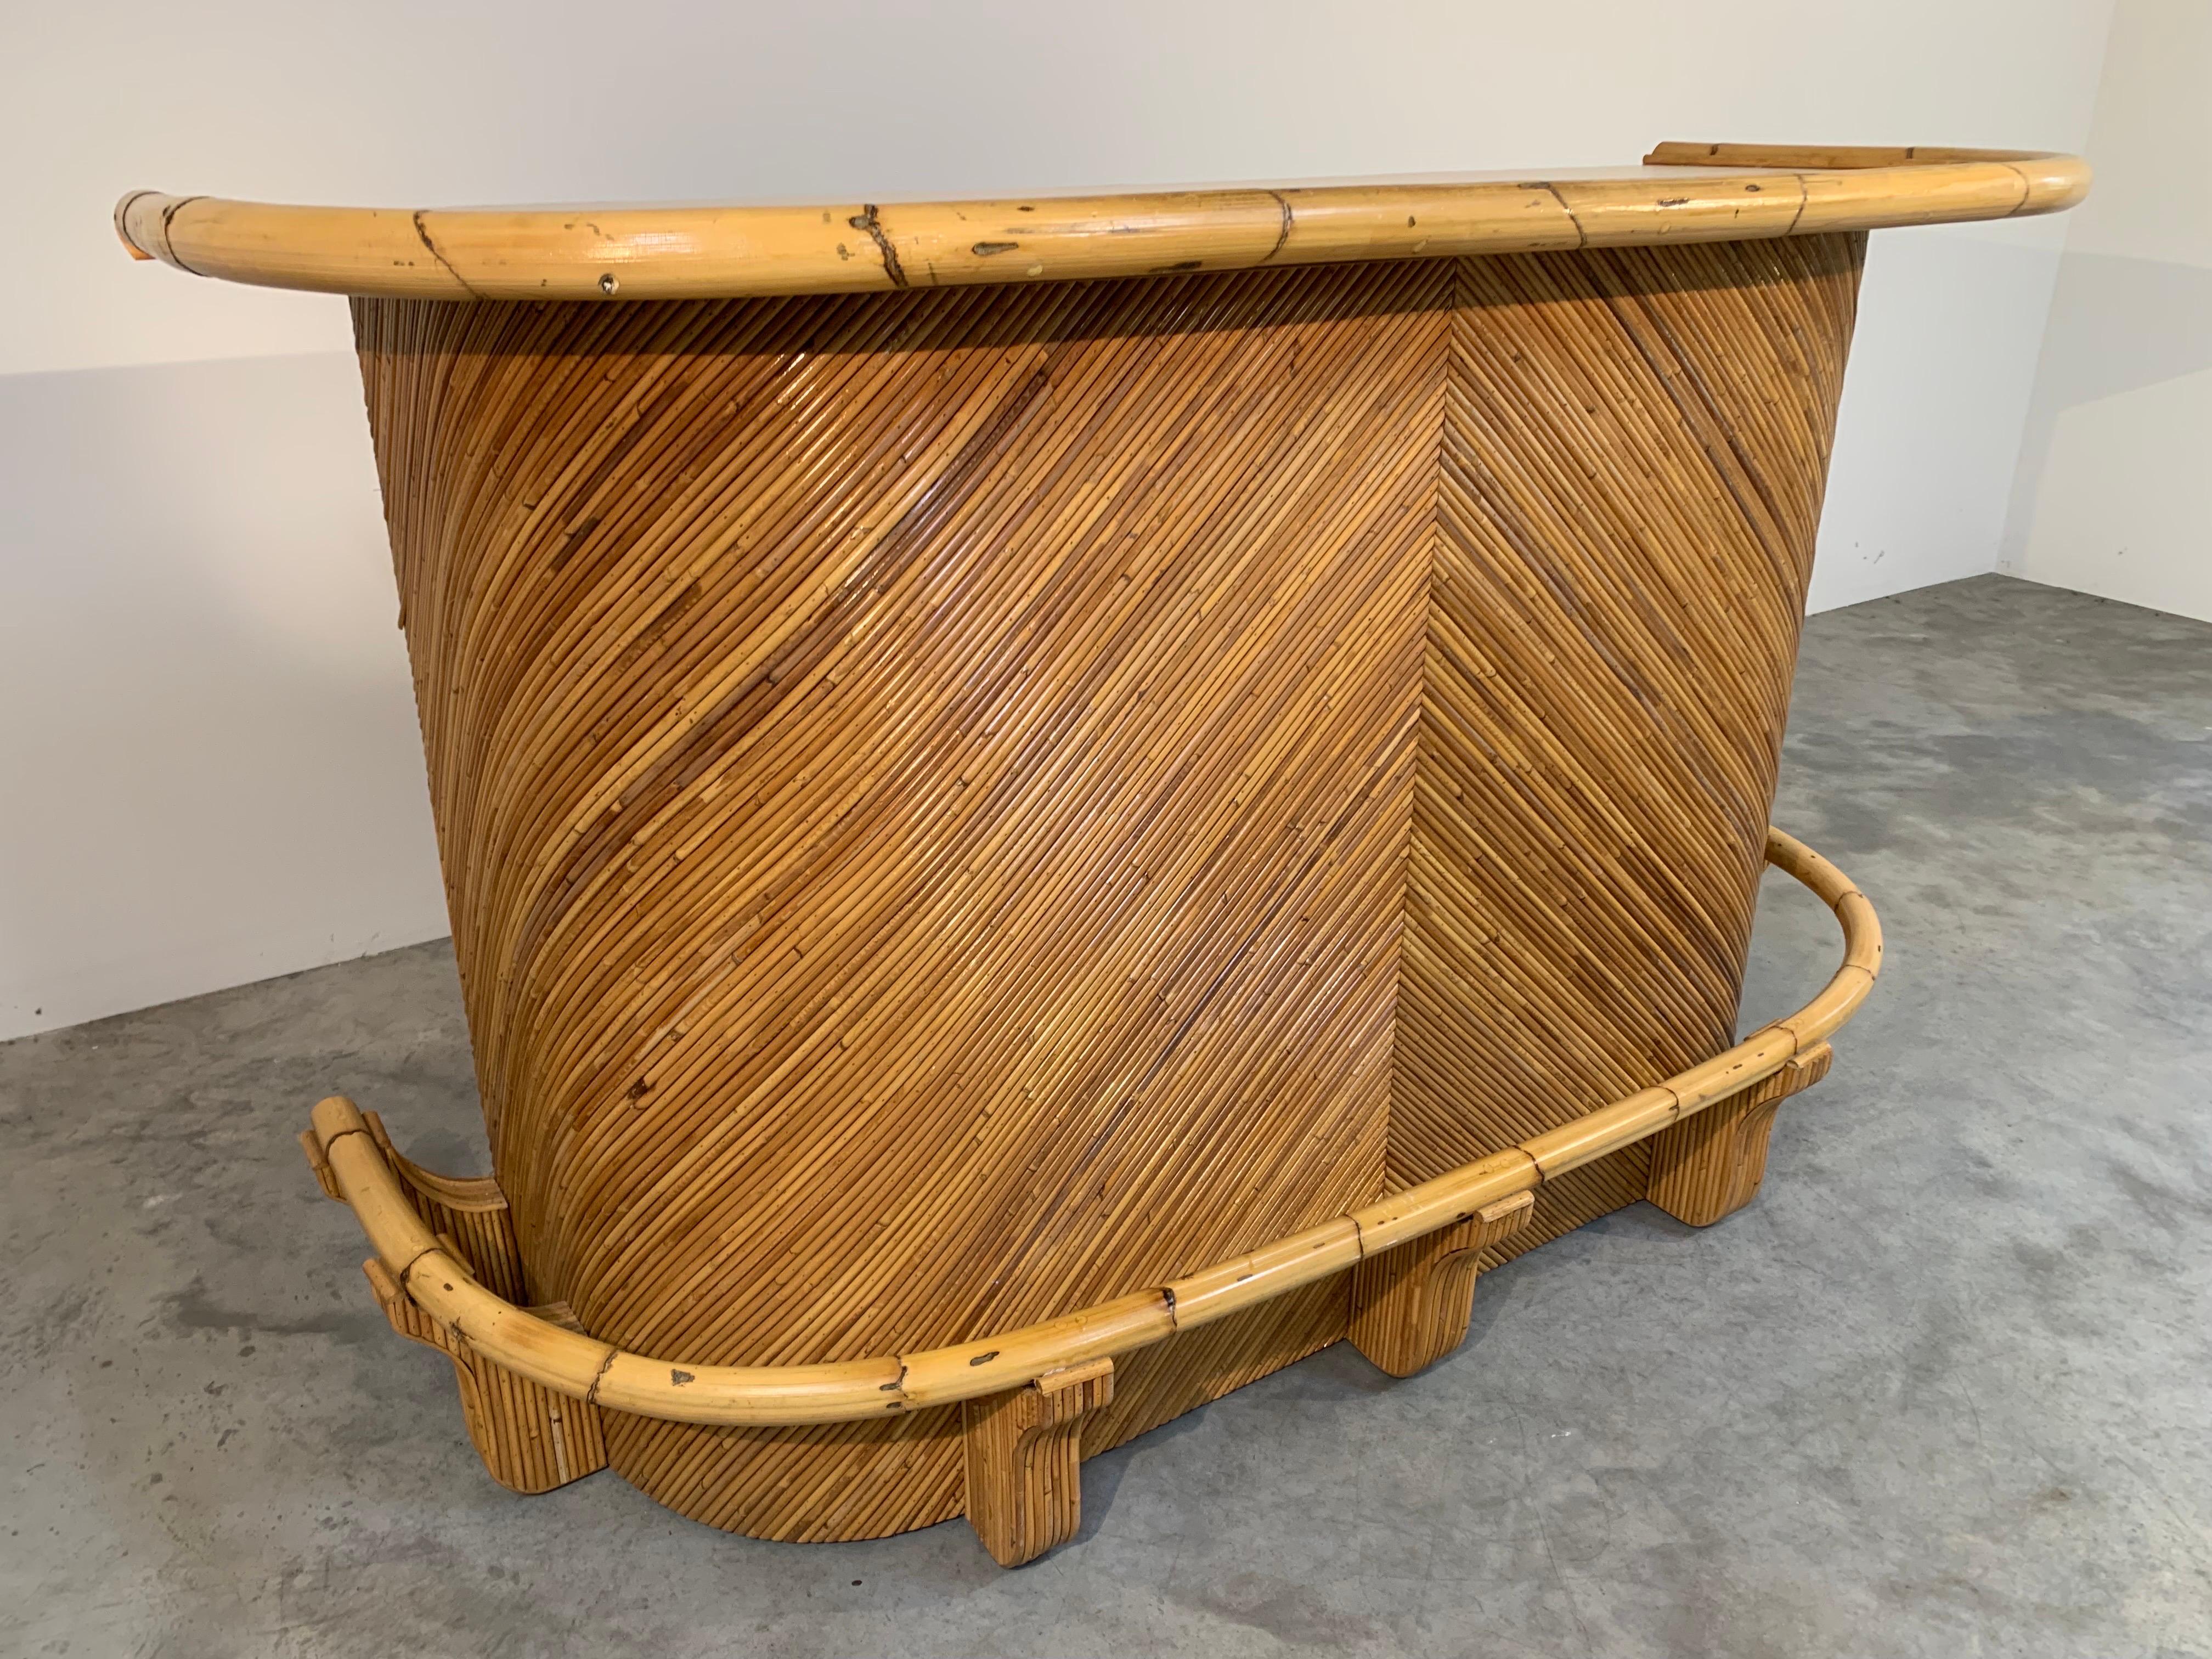 A stunning bamboo and pencil Reed dry bar having curved frame with bamboo footrest and armrest. A fantastic design in phenomenal condition having been gently used in a private residence. All of the Reed and bamboo are in fantastic conditions having